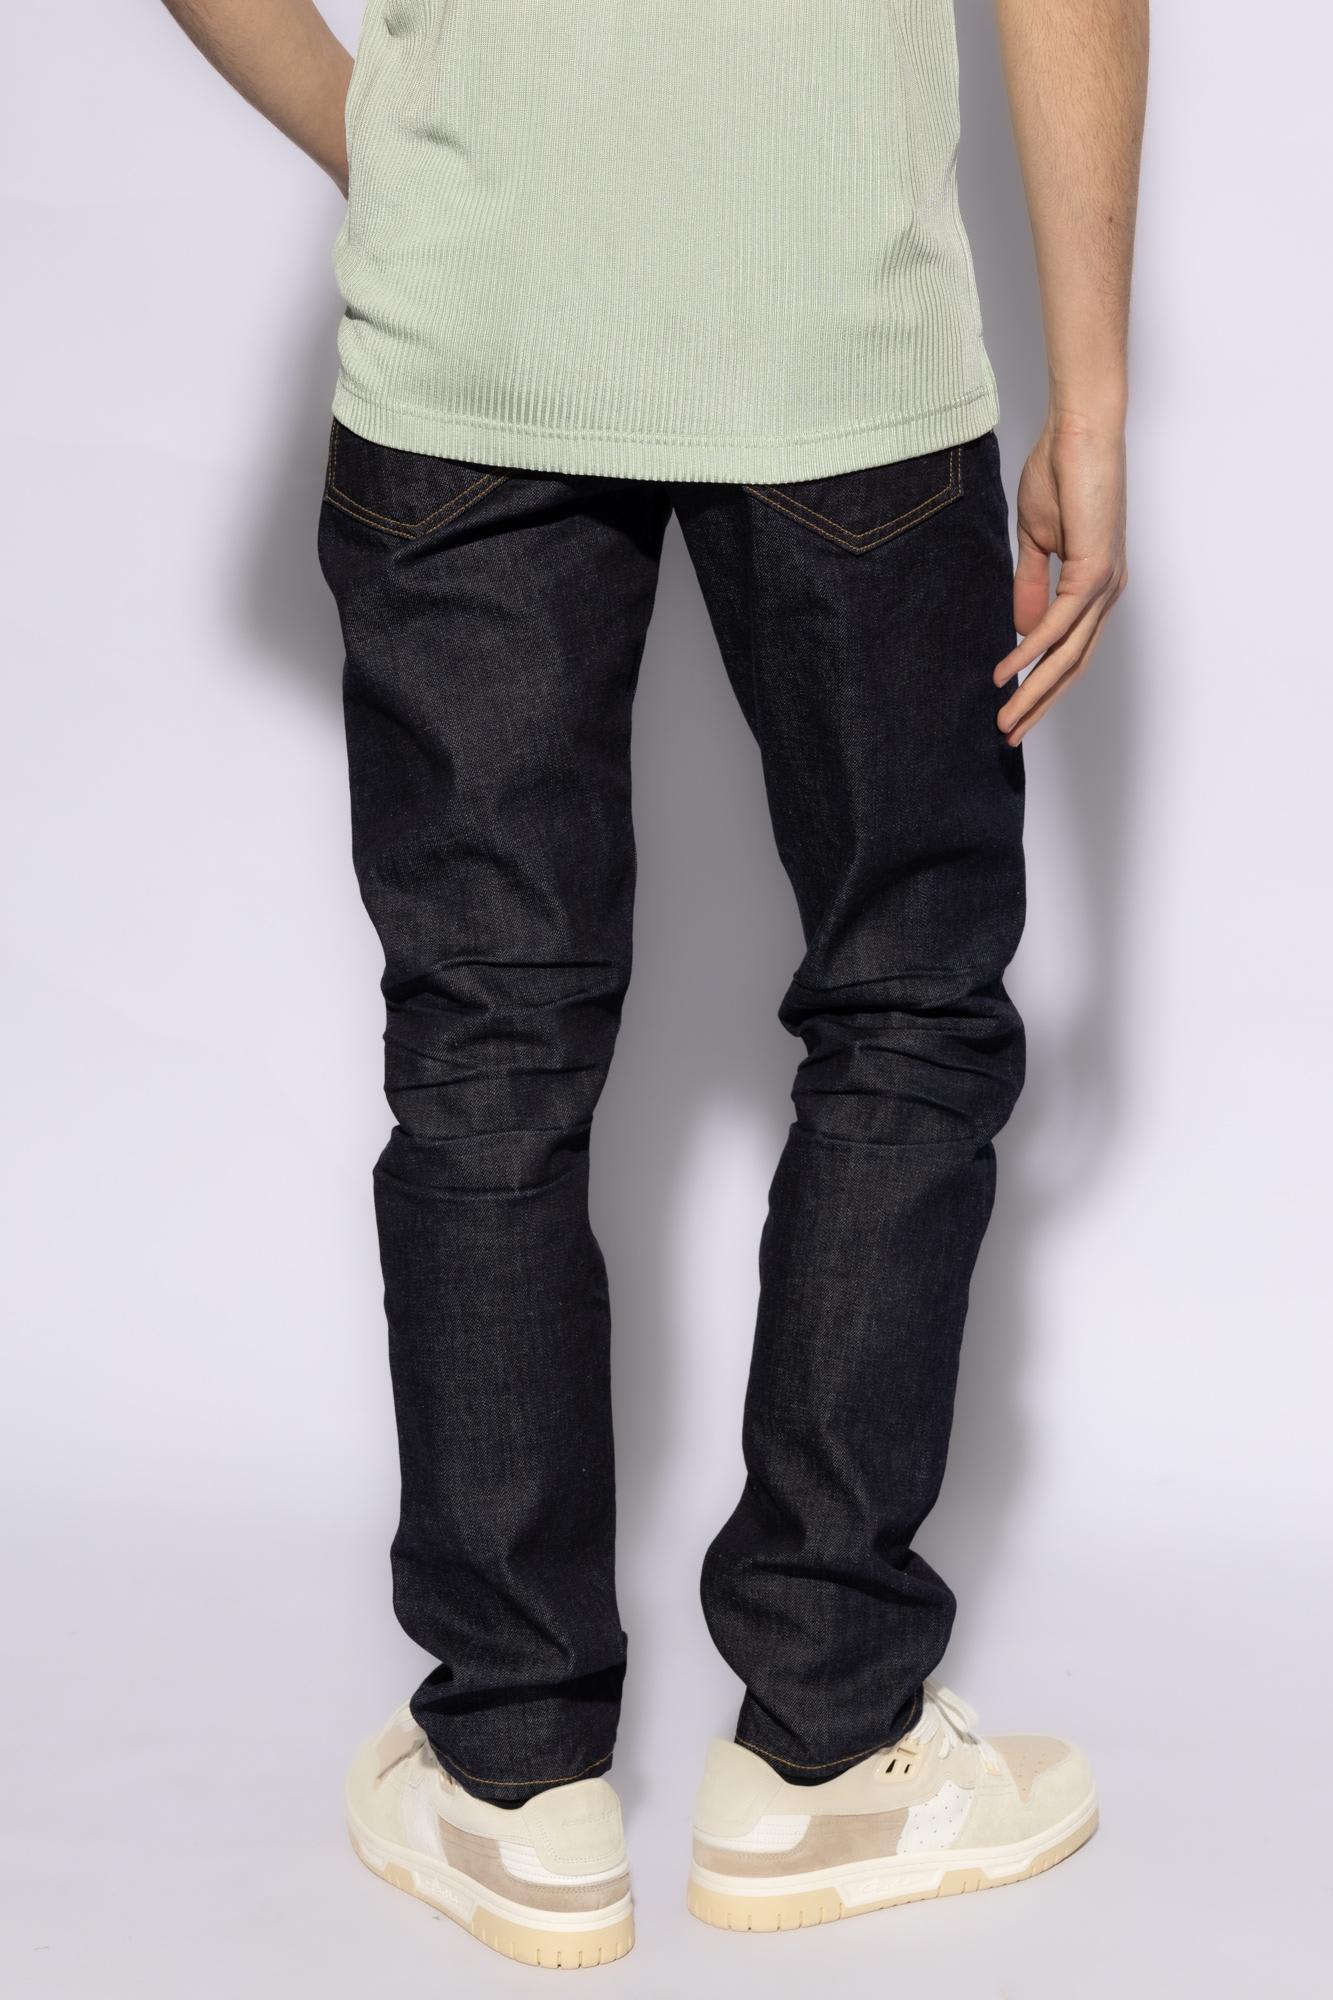 Shop Tom Ford Slim Fit Jeans In Blue